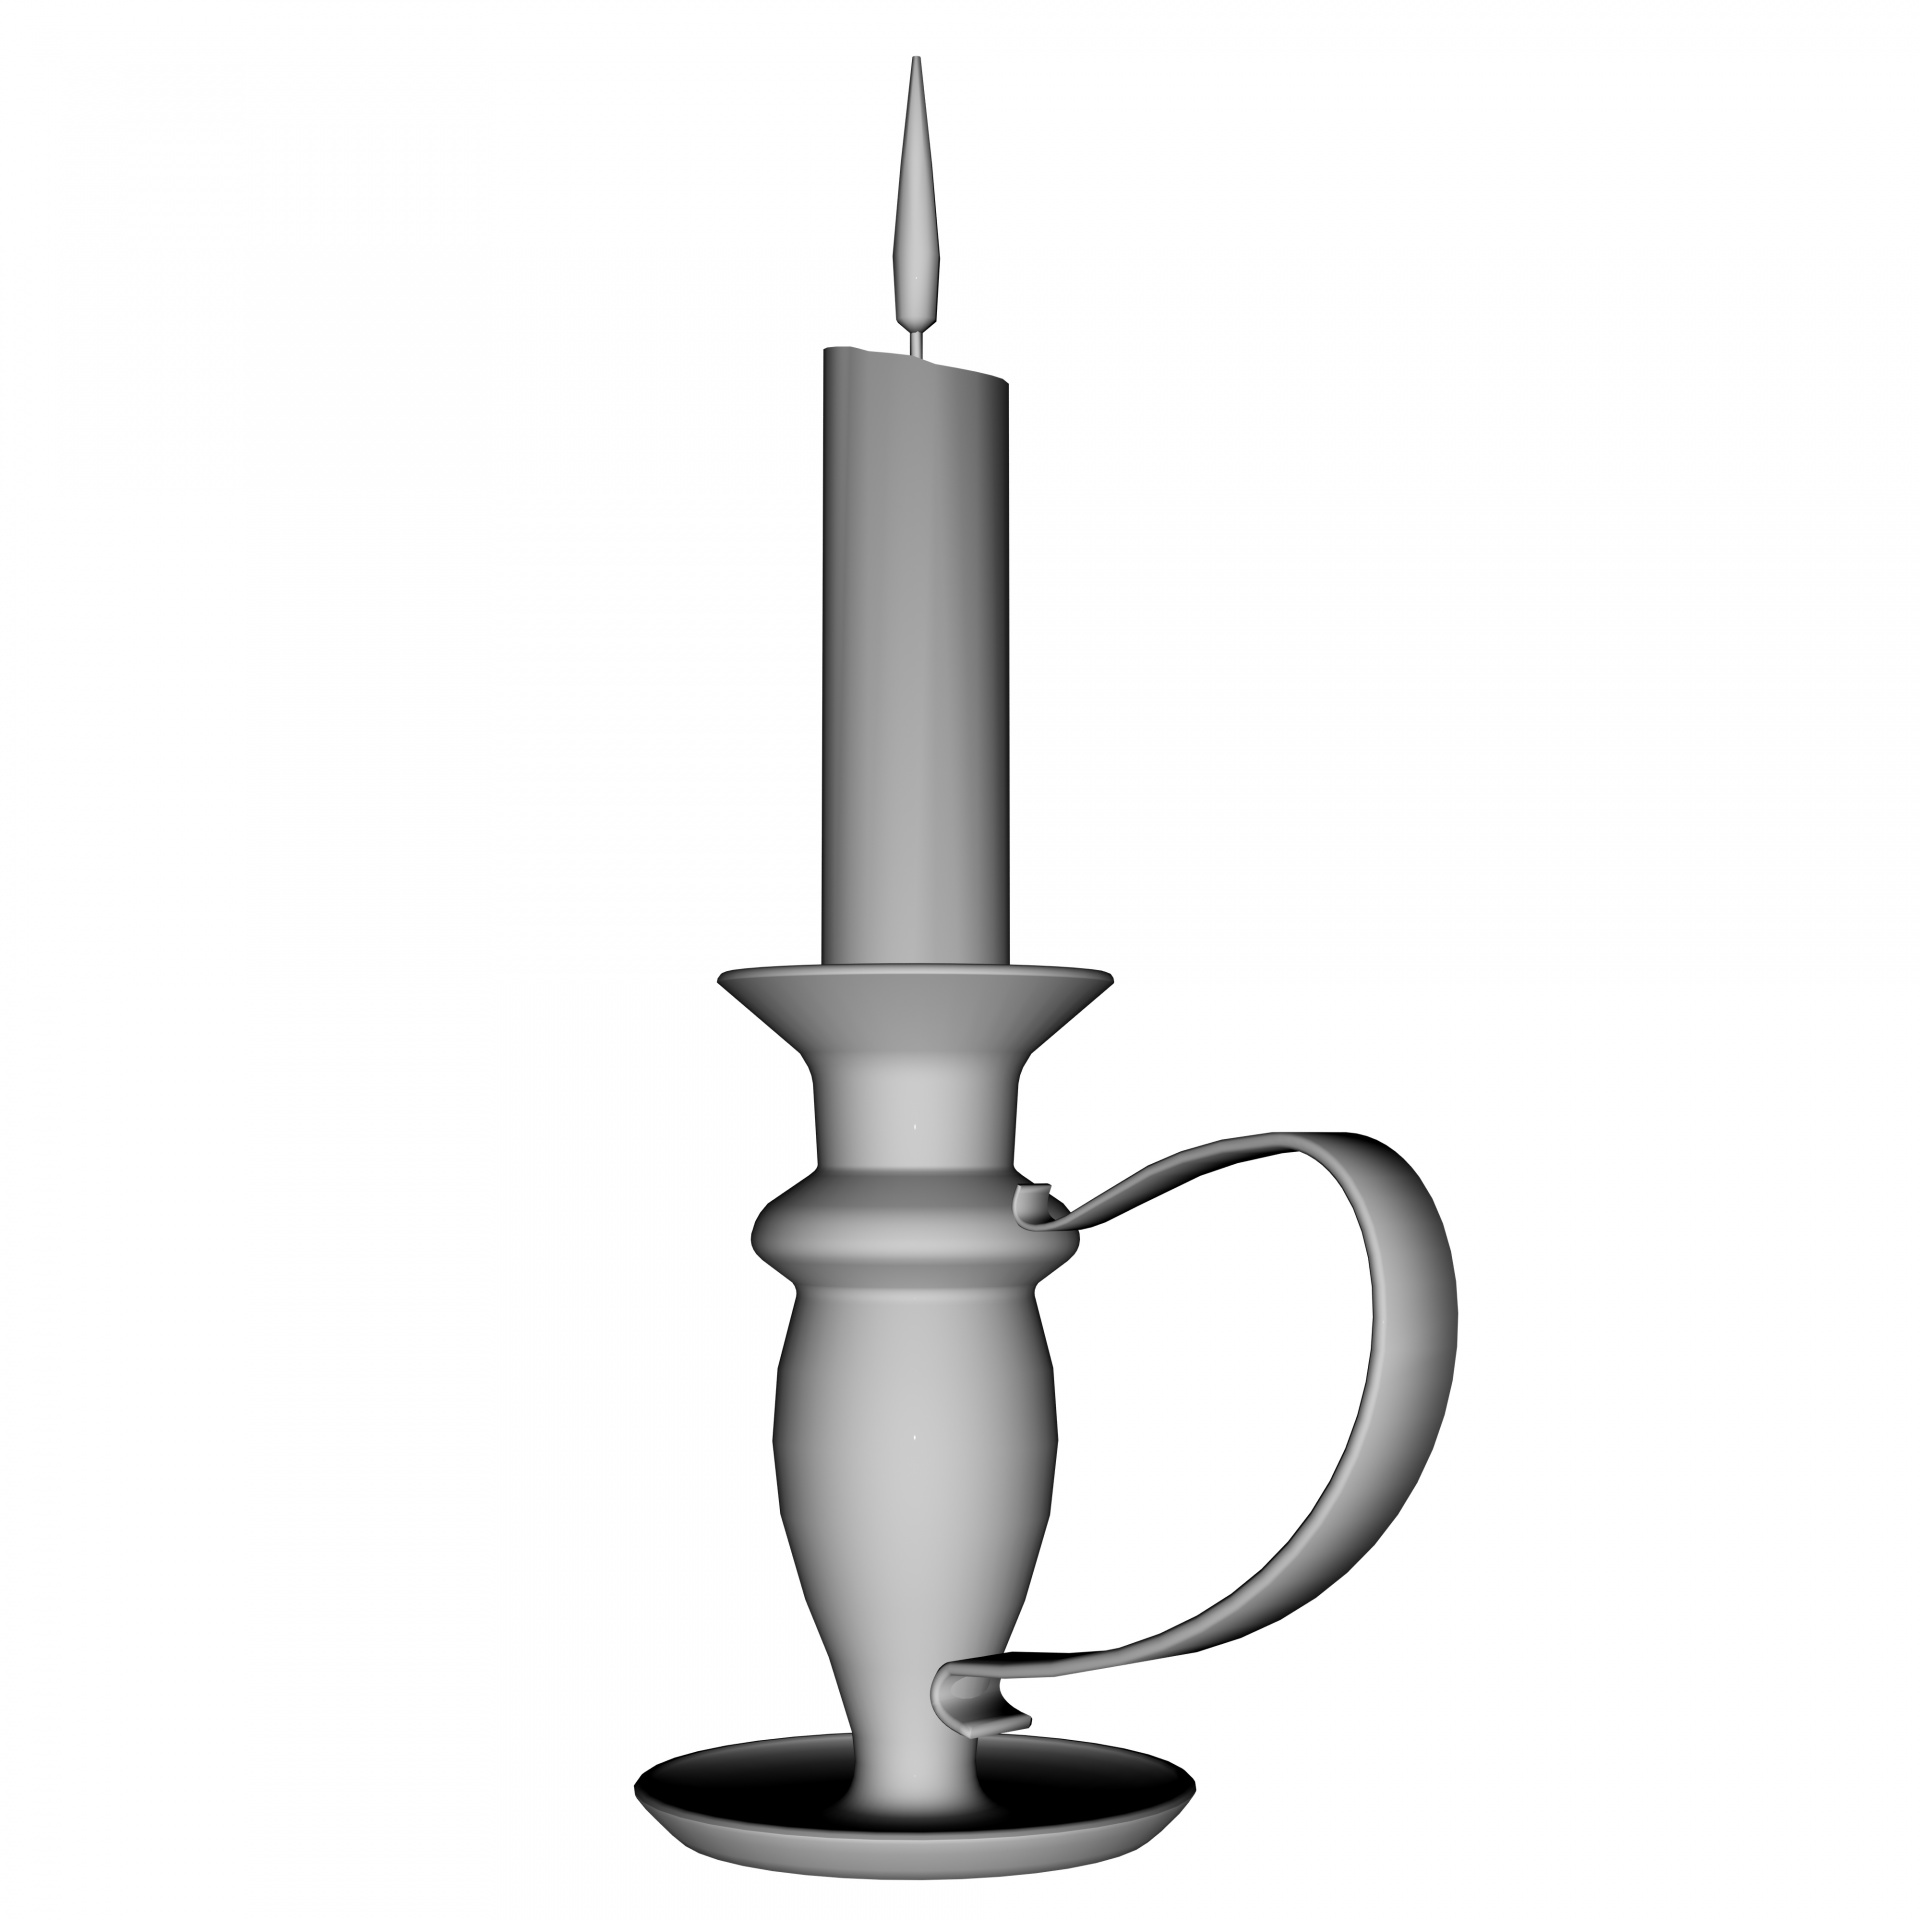 https://storage.needpix.com/rsynced_images/candle-with-a-handle.jpg